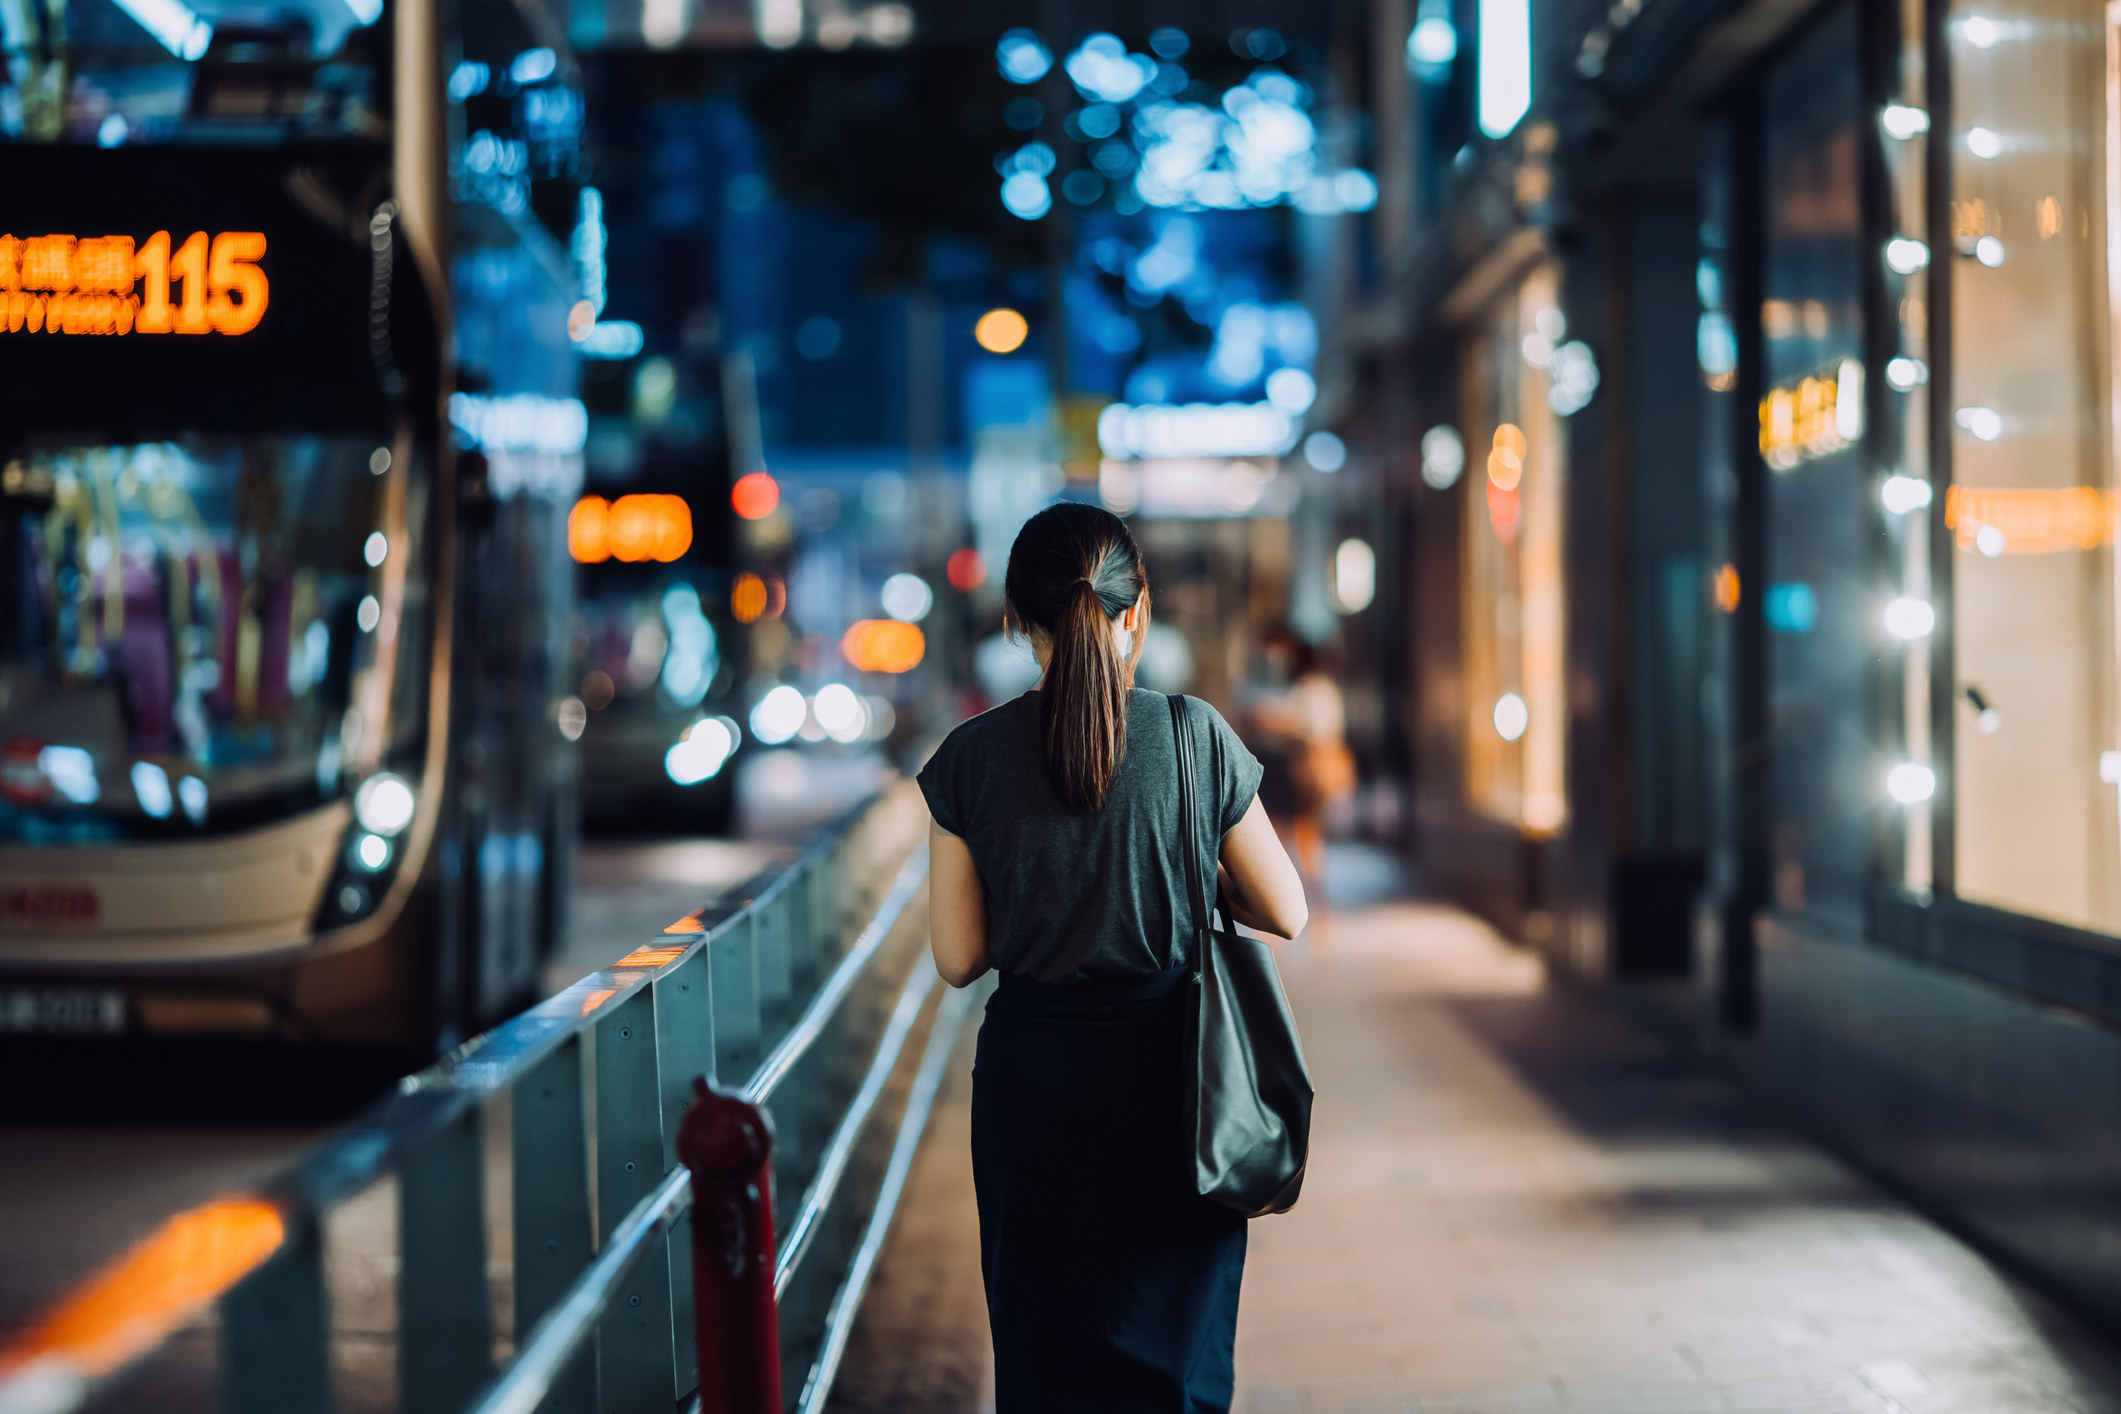 A woman walking home alone at night